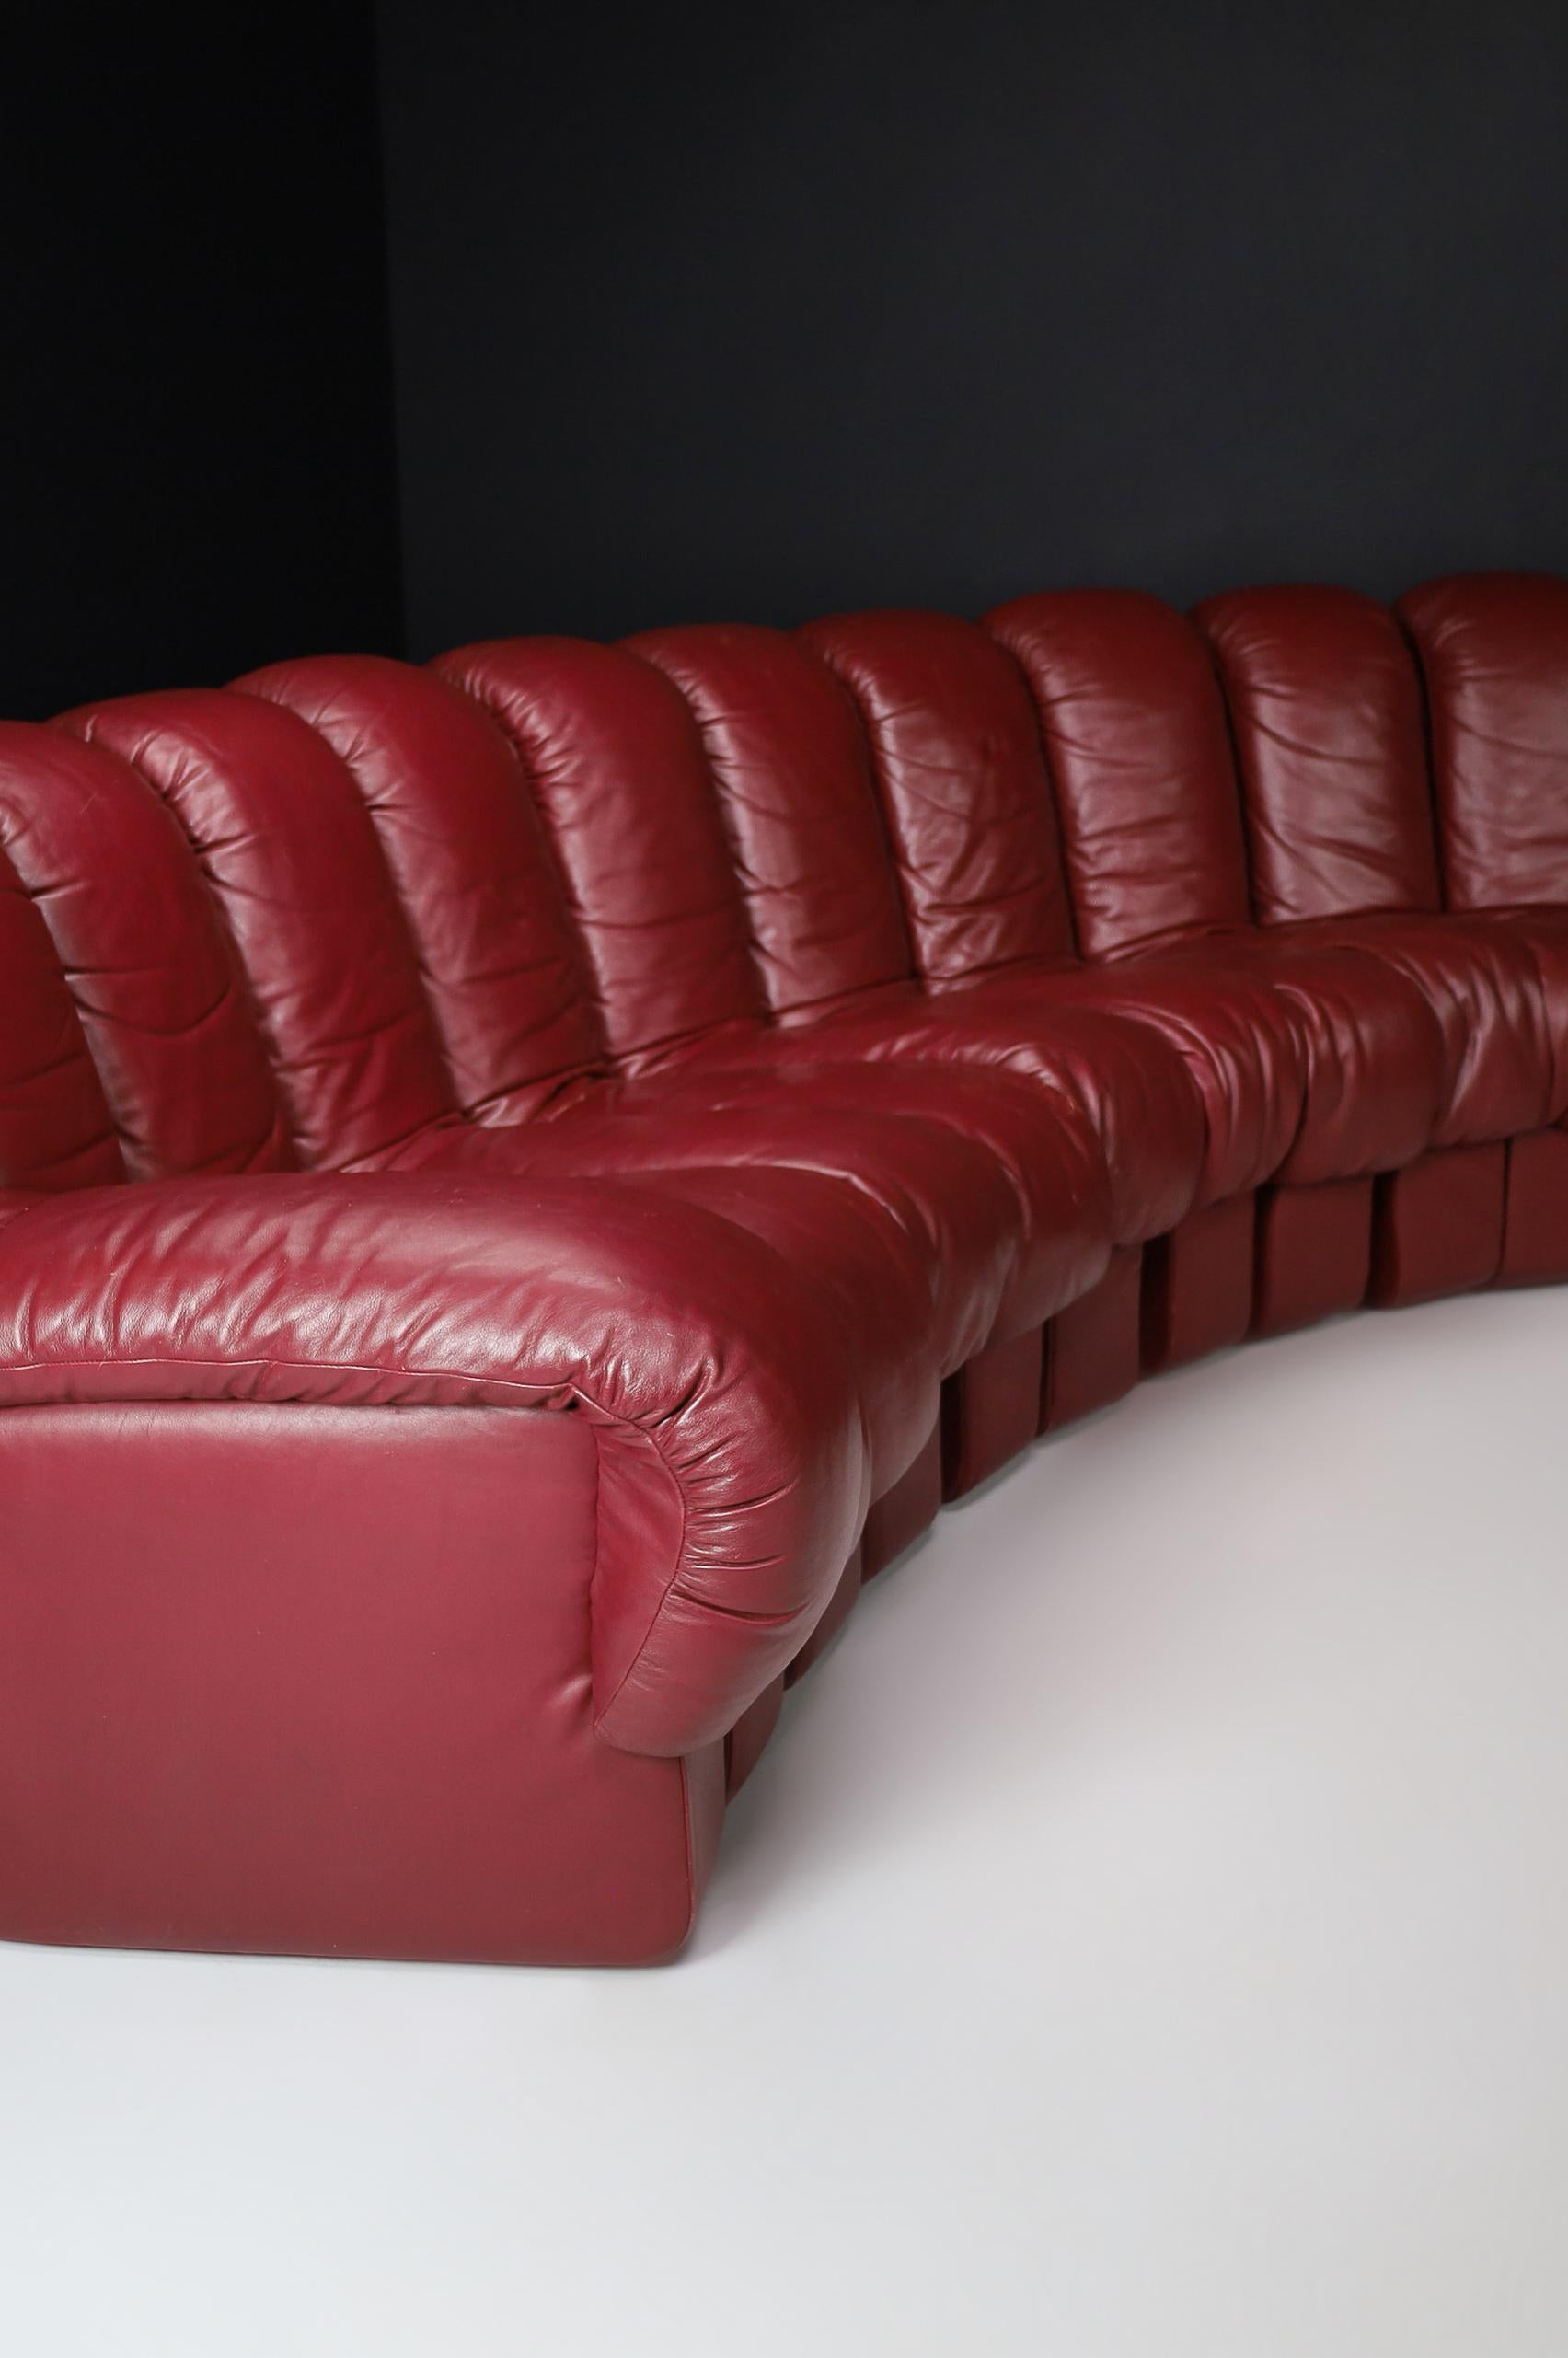 20th Century De Sede DS-600 'Snake' Sectional Sofa in Full Bordeaux Leather by Ueli Berger. For Sale